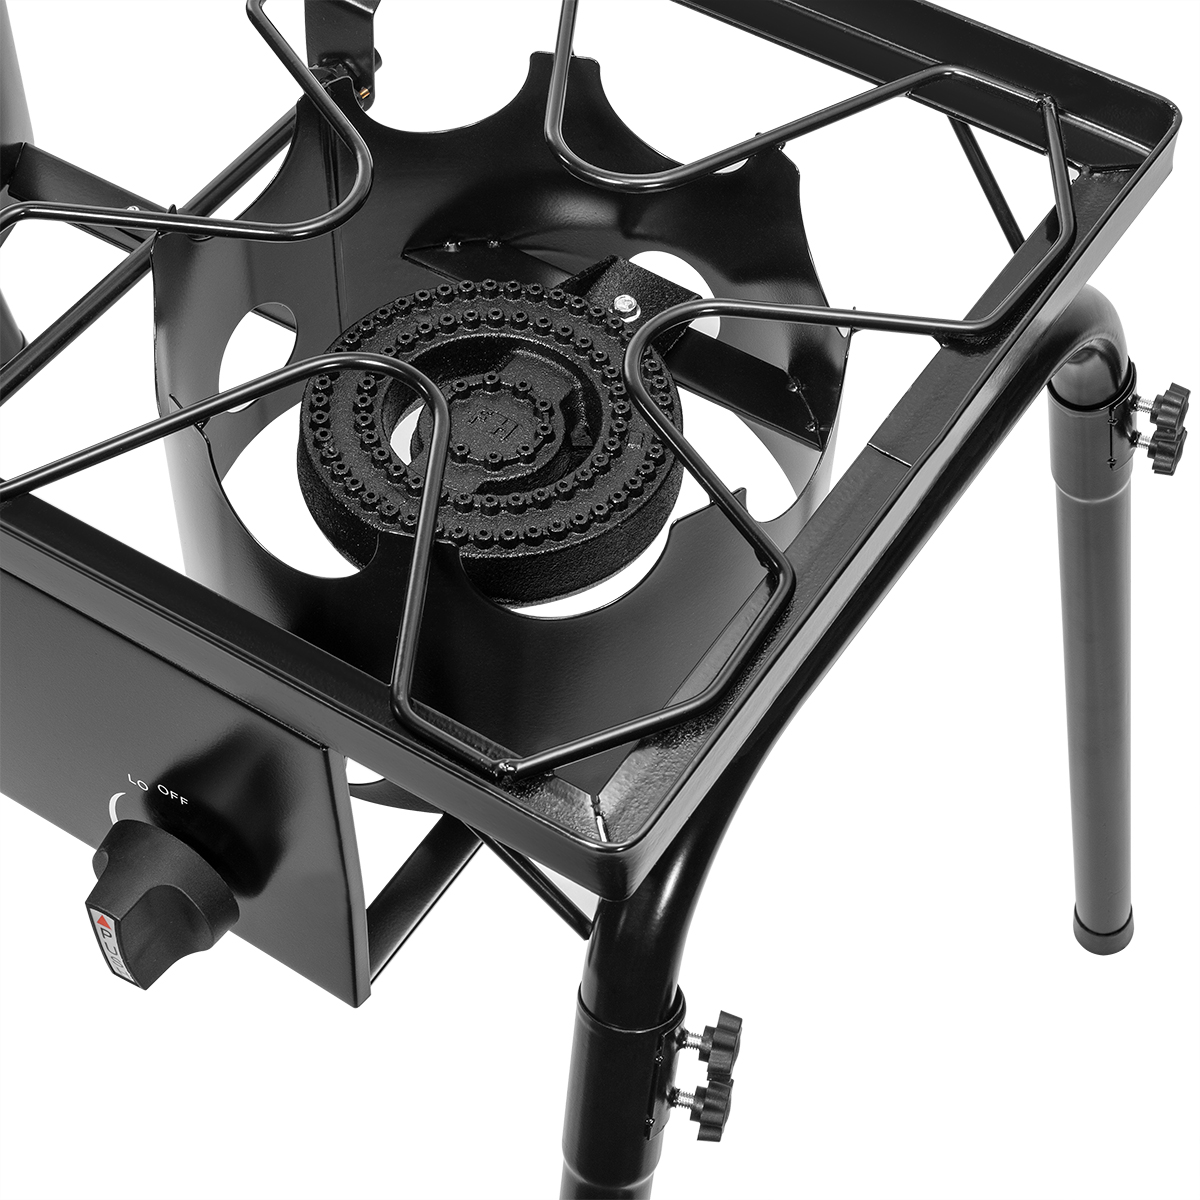 Barton Outdoor 70000 BTU 2-Burner Stove 95512-1 High-Pressure Grill Cooker BBQ Camp Gas Stove Stand - image 4 of 7